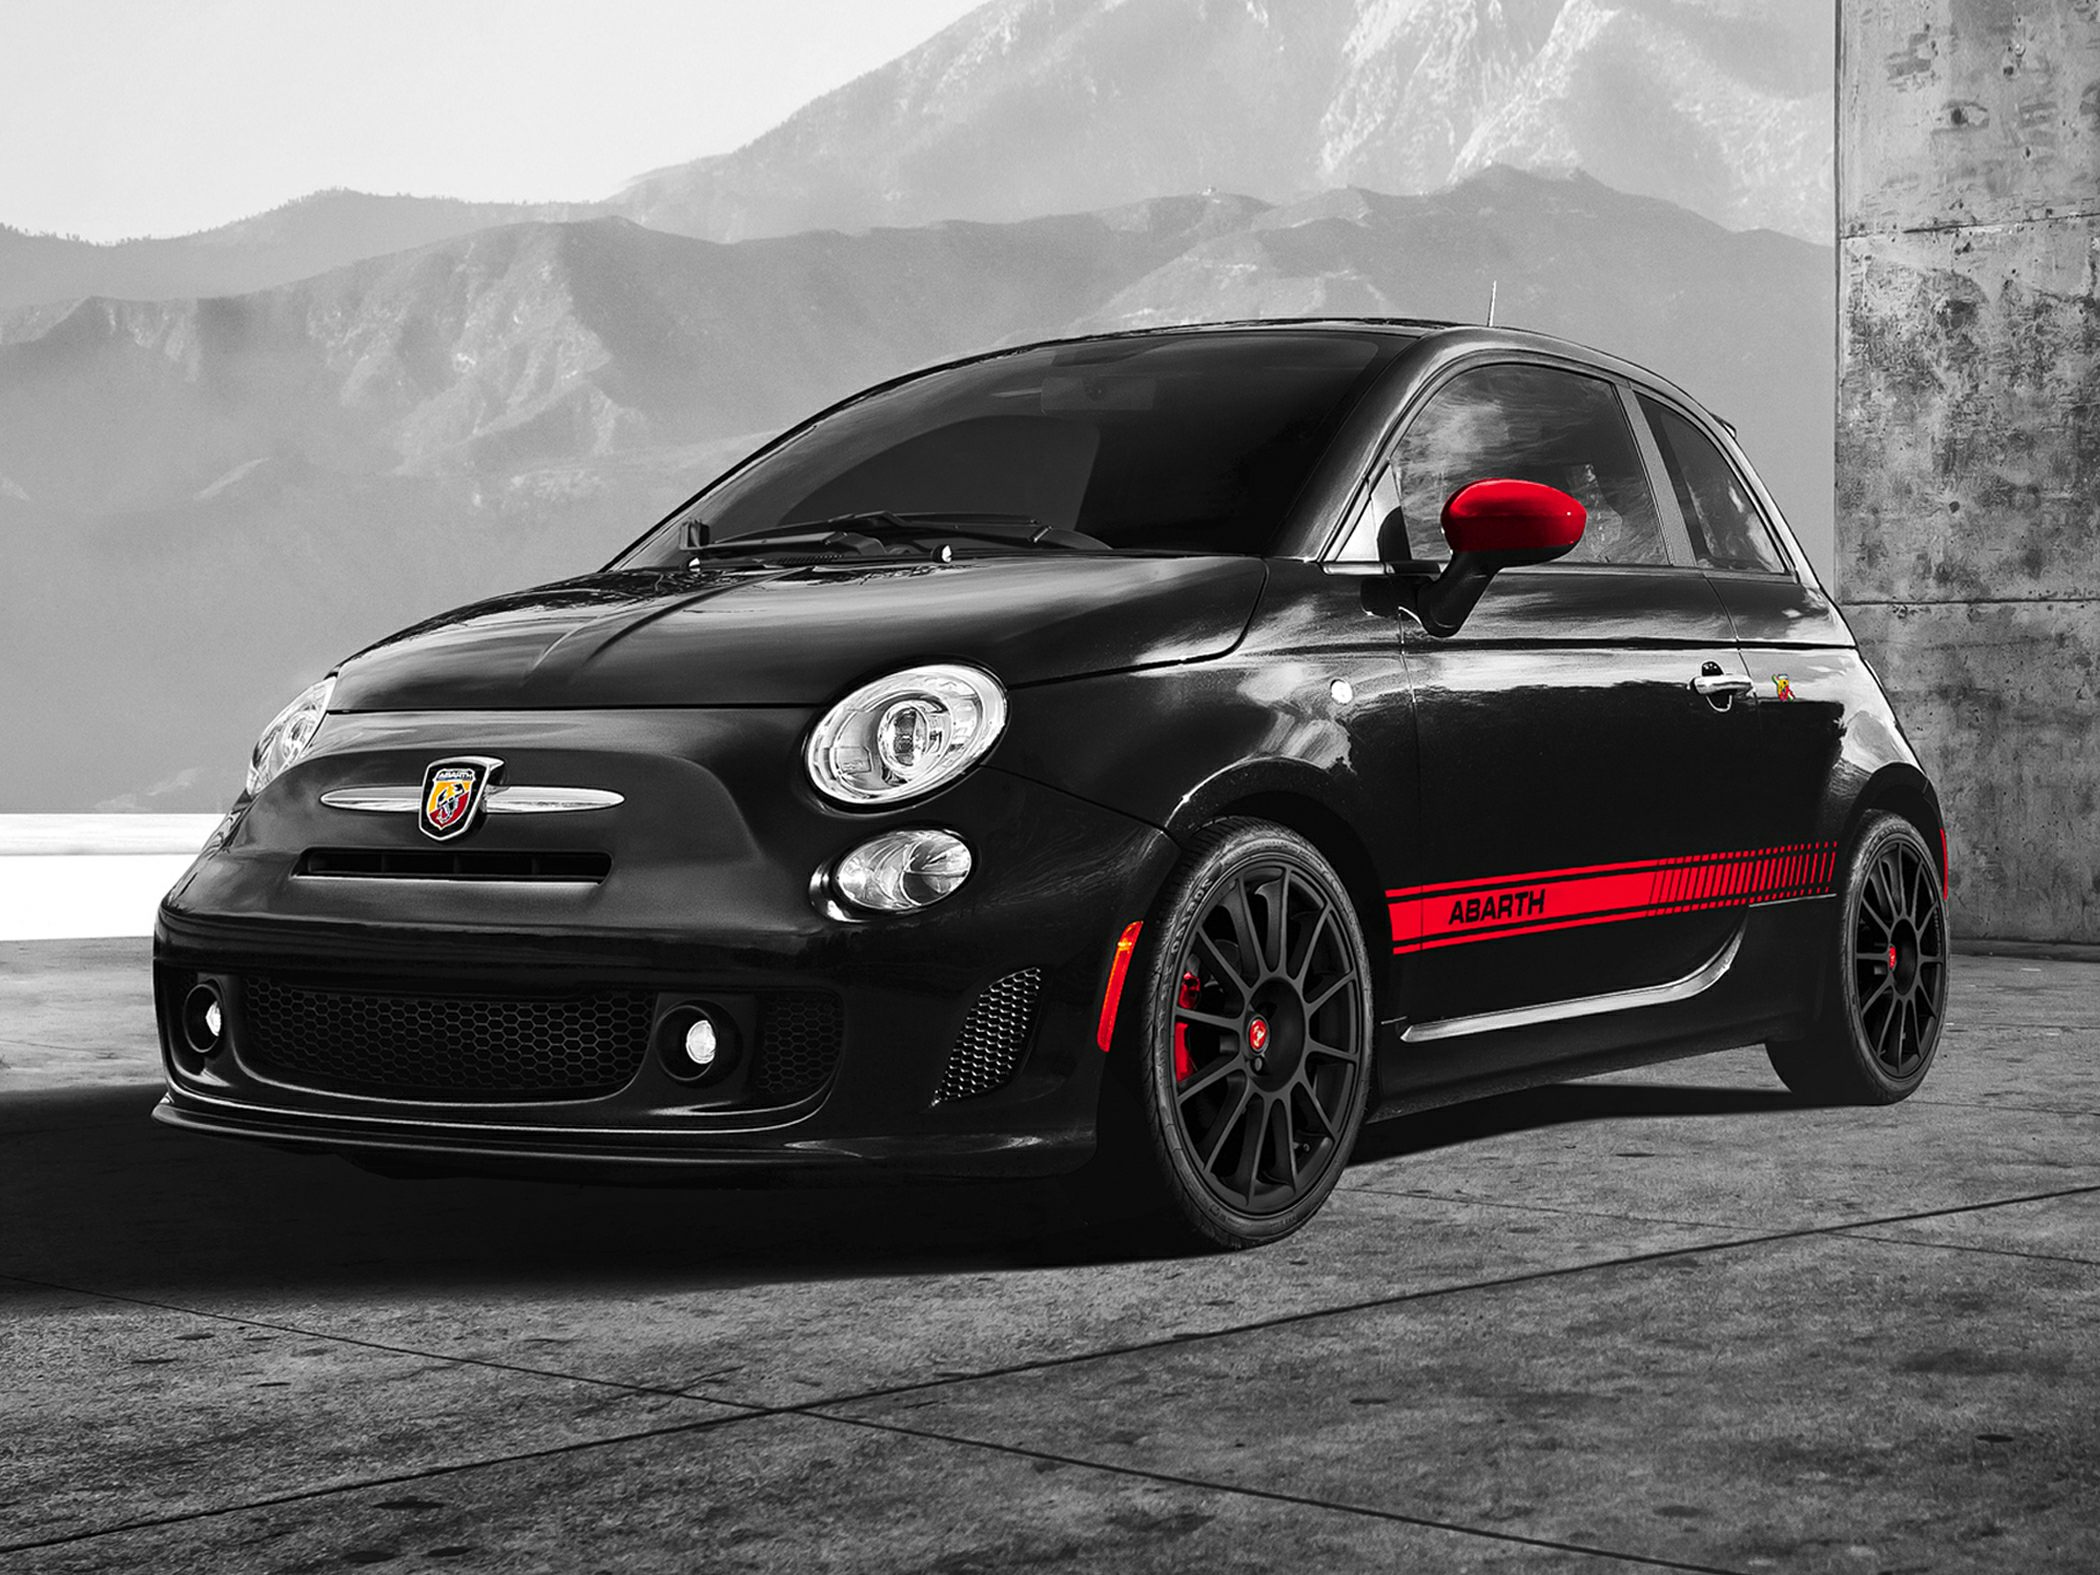 Fiat 500 Gucci Edition returns, priced from 23,750